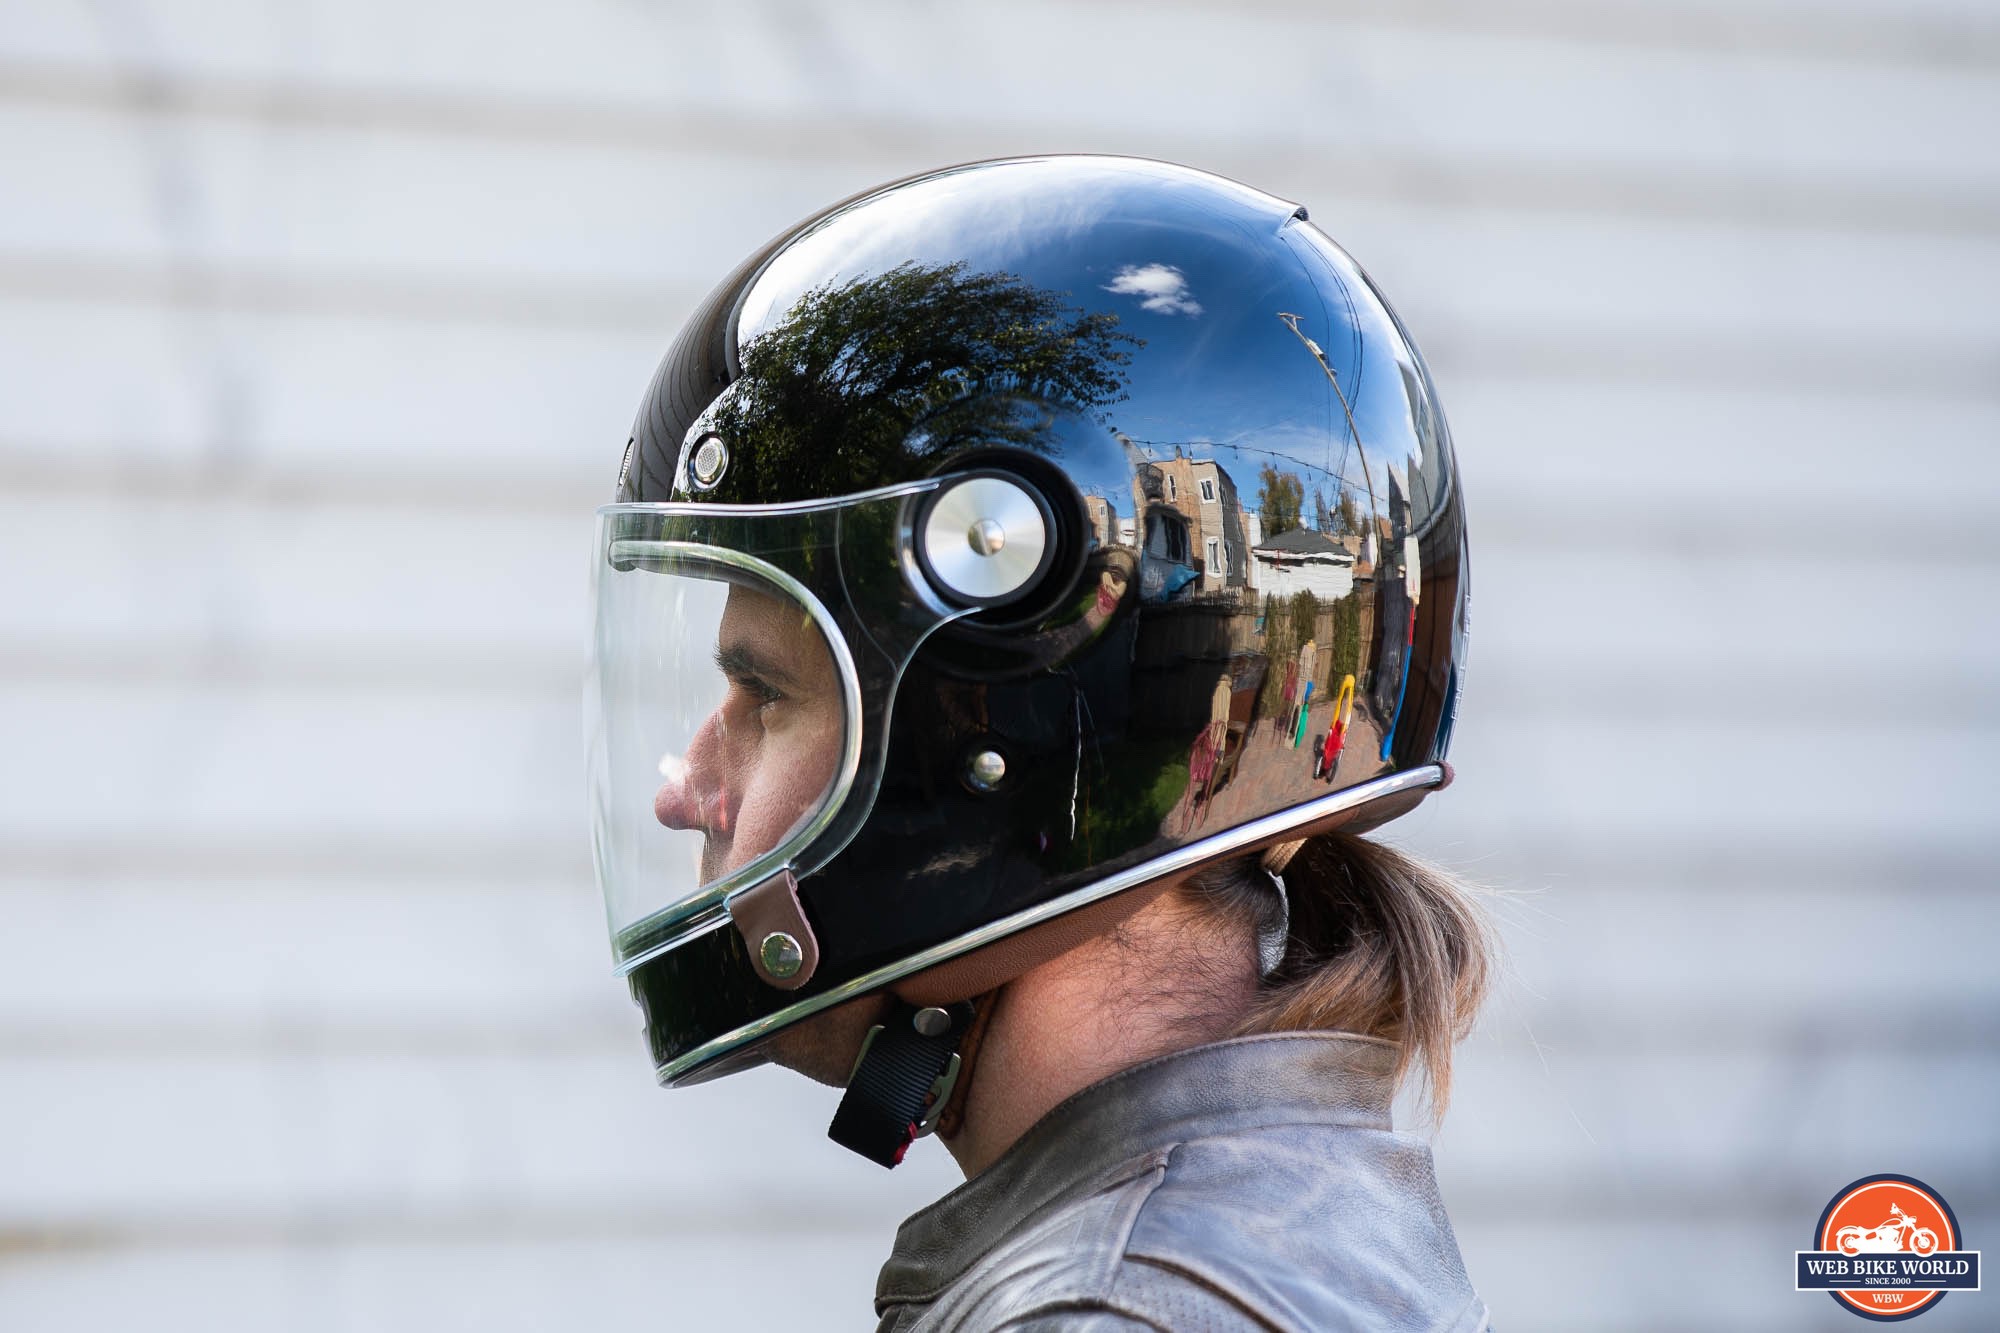 Side view of author wearing Bell Bullitt Helmet with face shield lowered